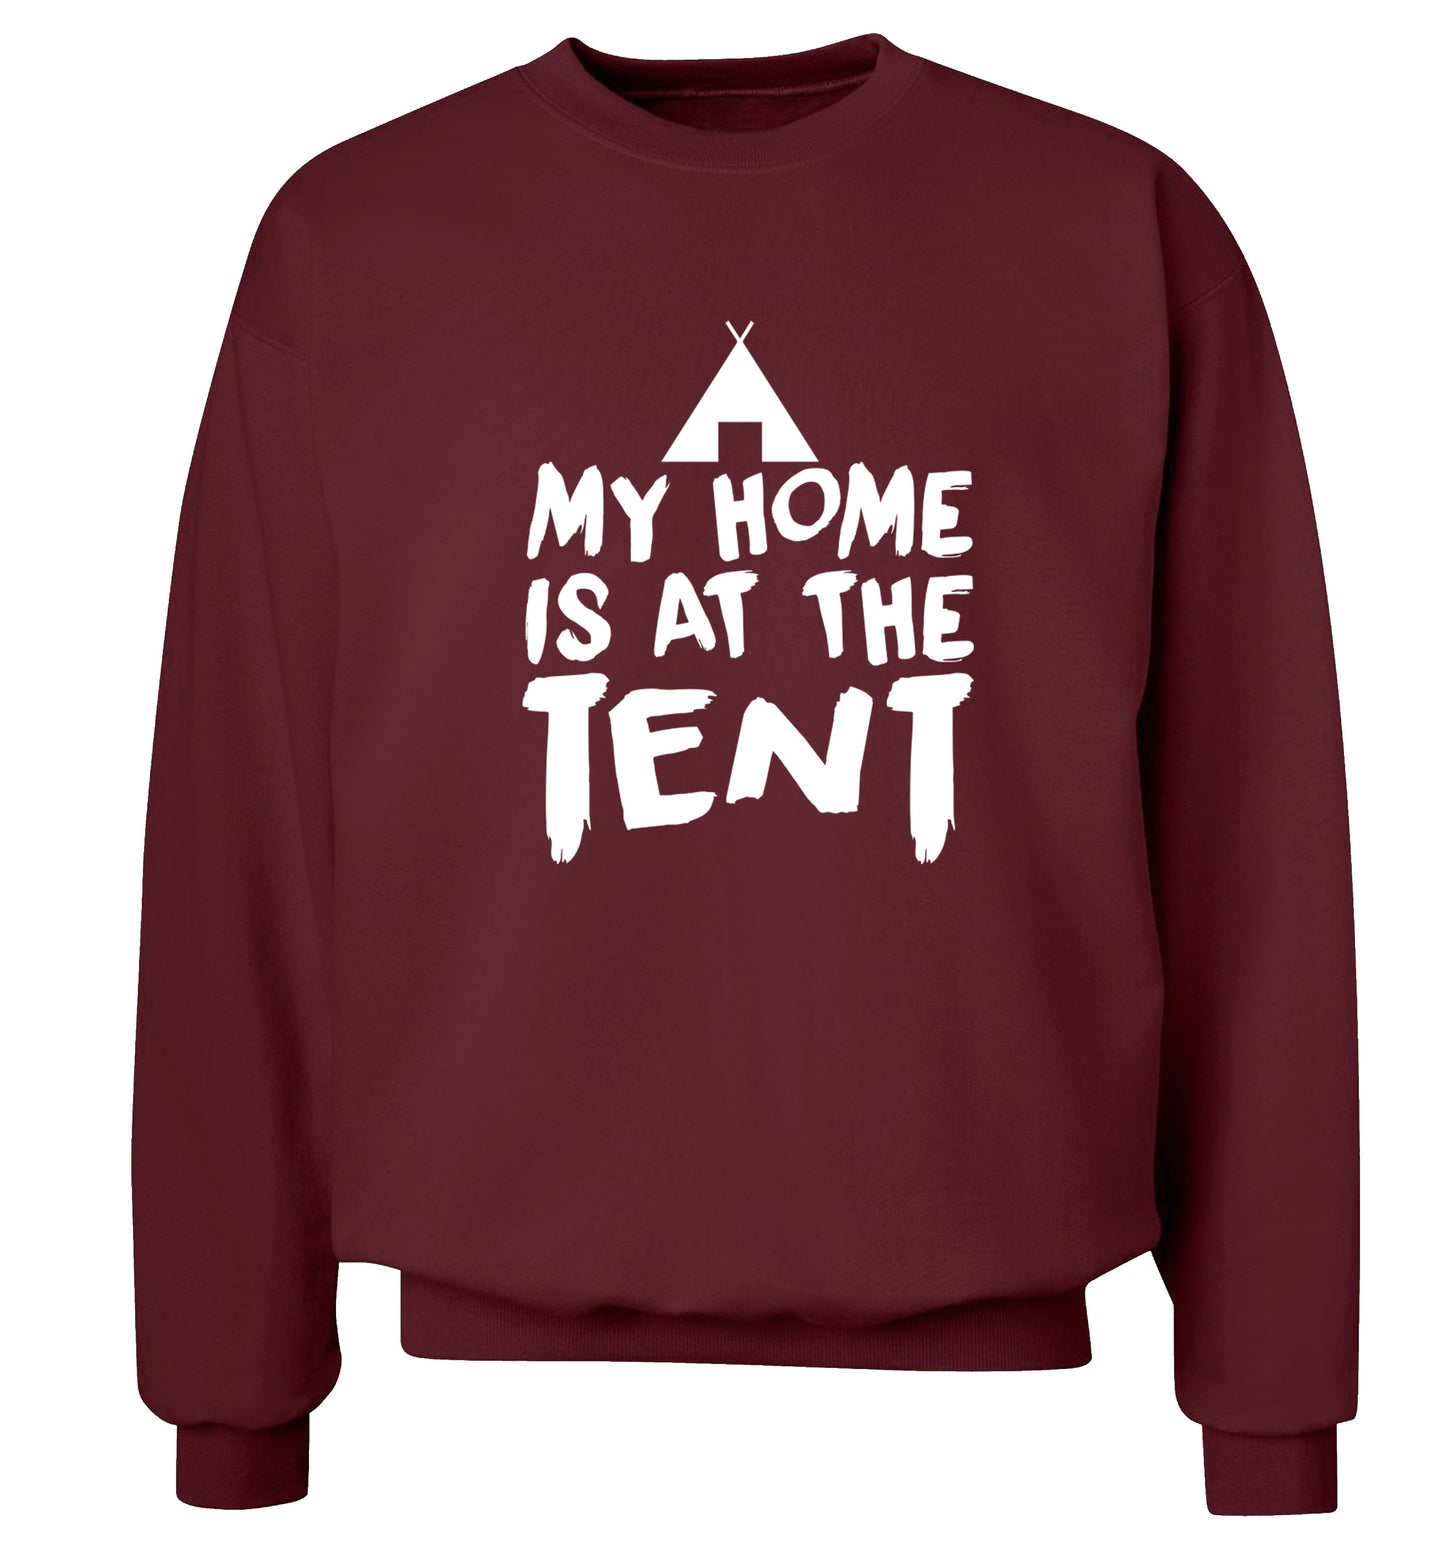 My home is at the tent Adult's unisex maroon Sweater 2XL